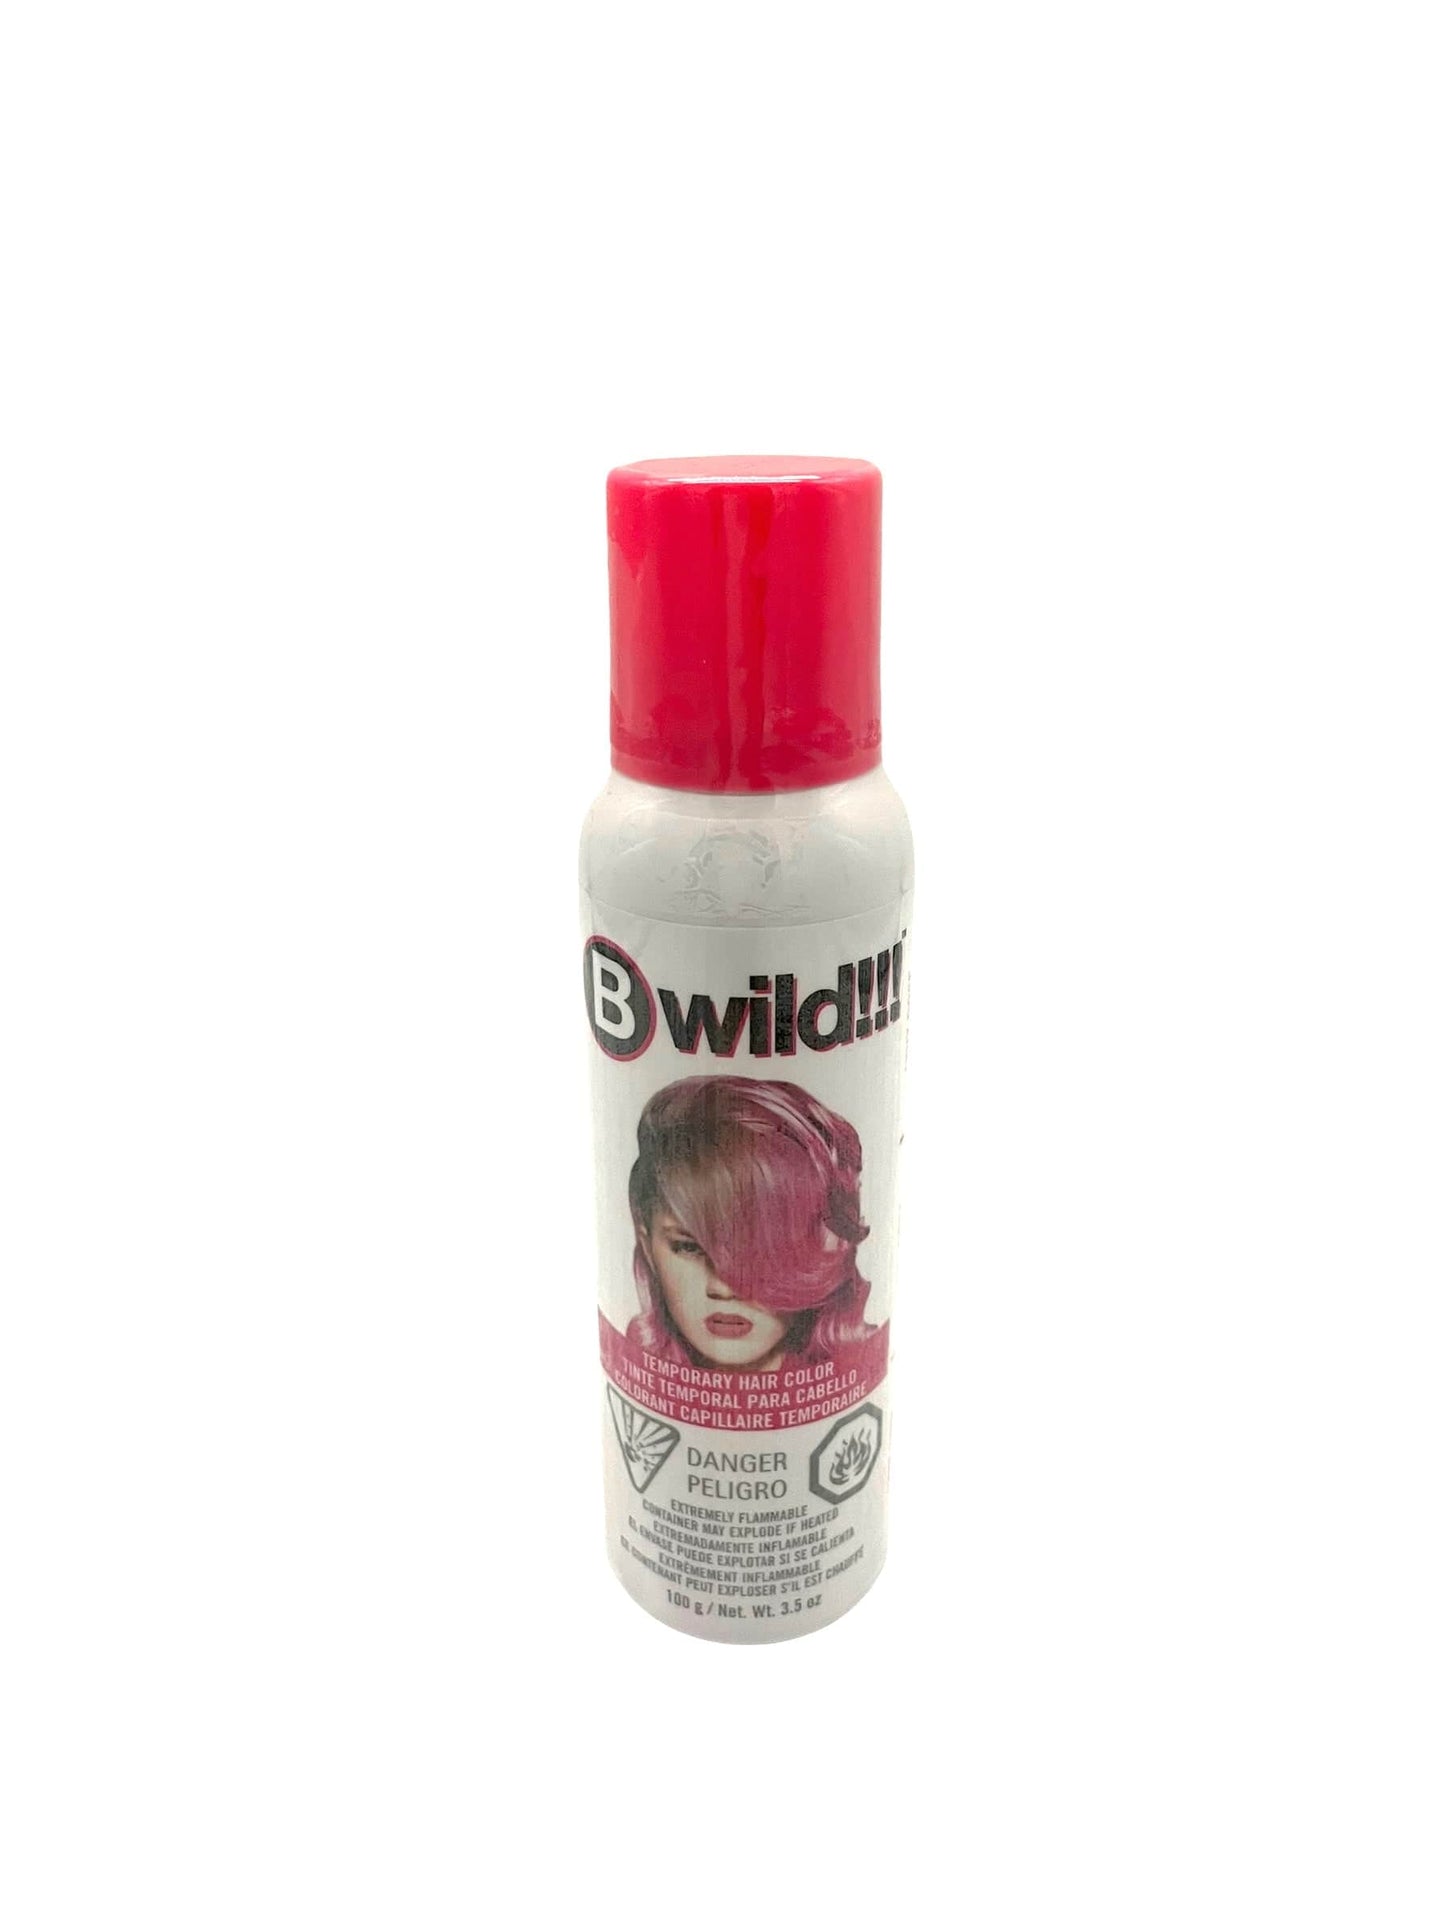 Jerome Russell B Wild Temporary Hair Color Spray 3.5 oz Lynx pink